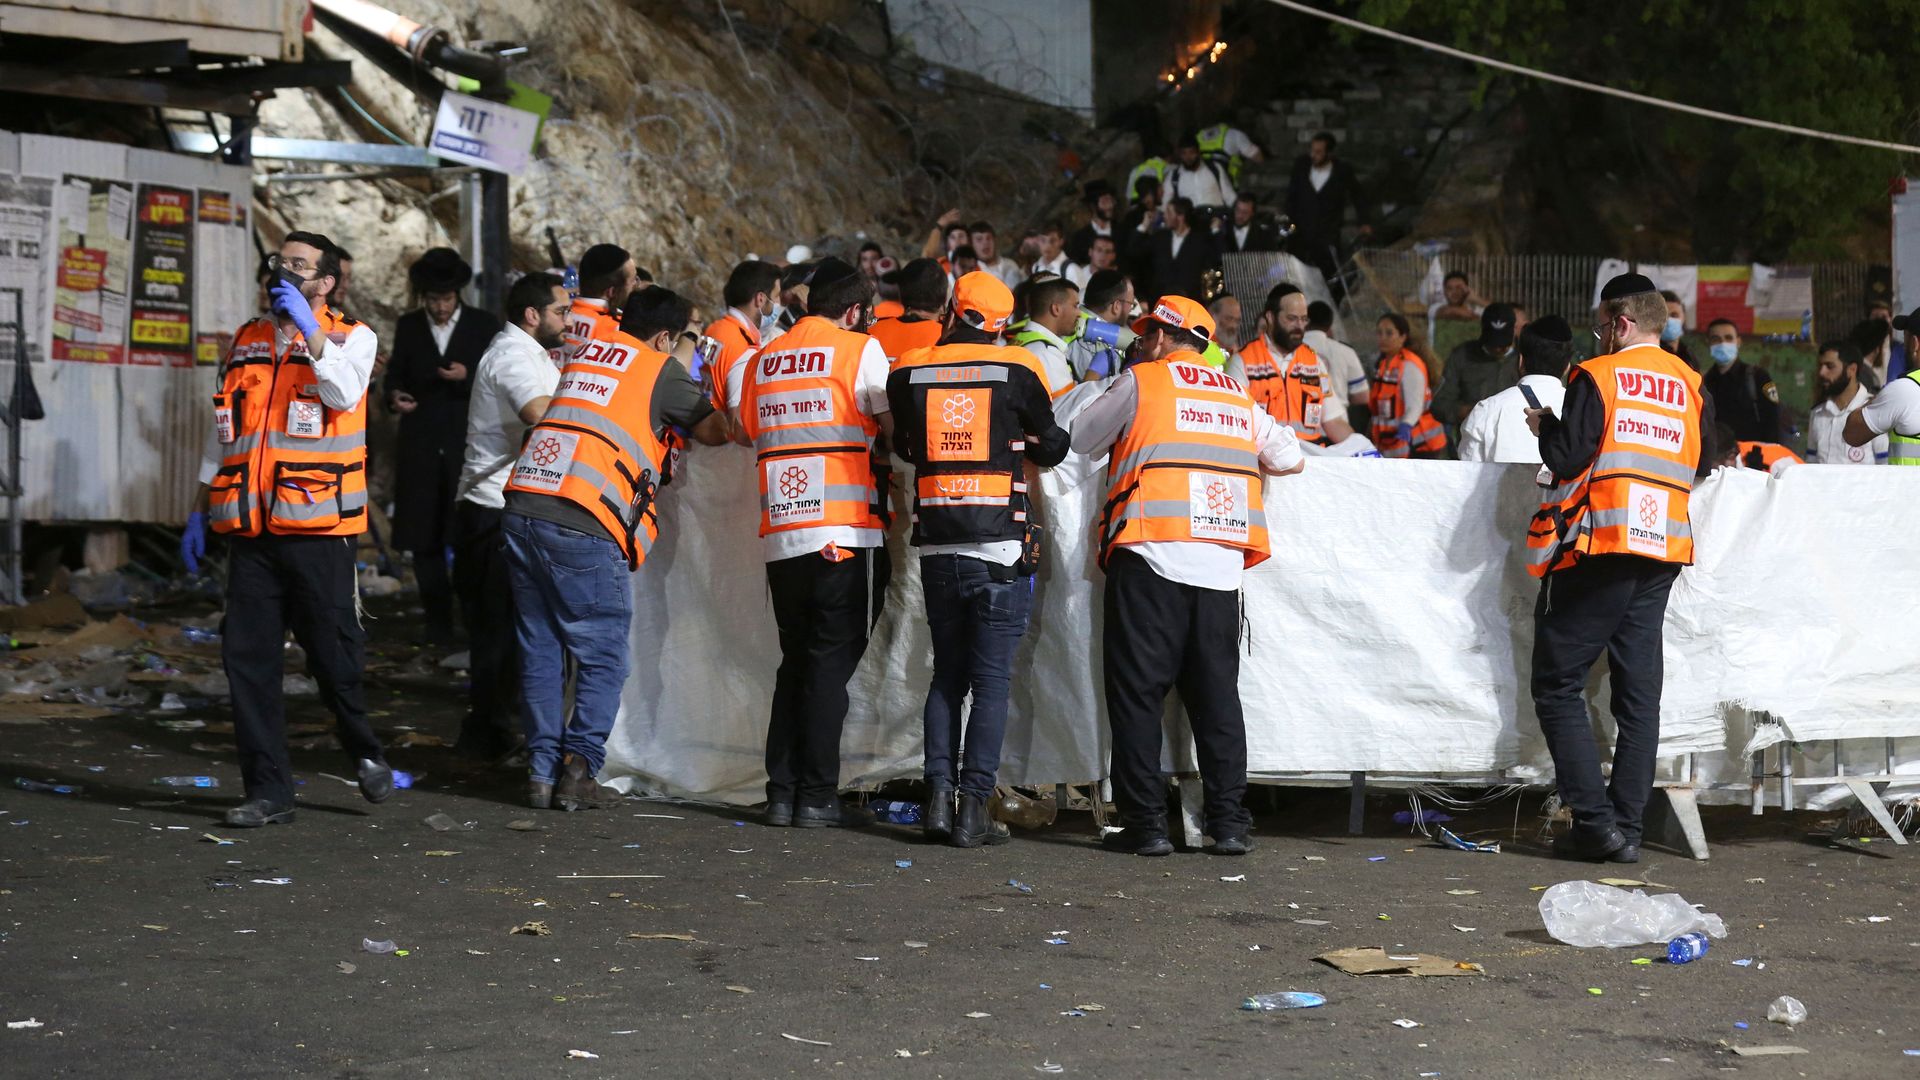 Emergency workers gather at the scene after dozens of people were killed and others injured in a stampede in Meron, Israel. 